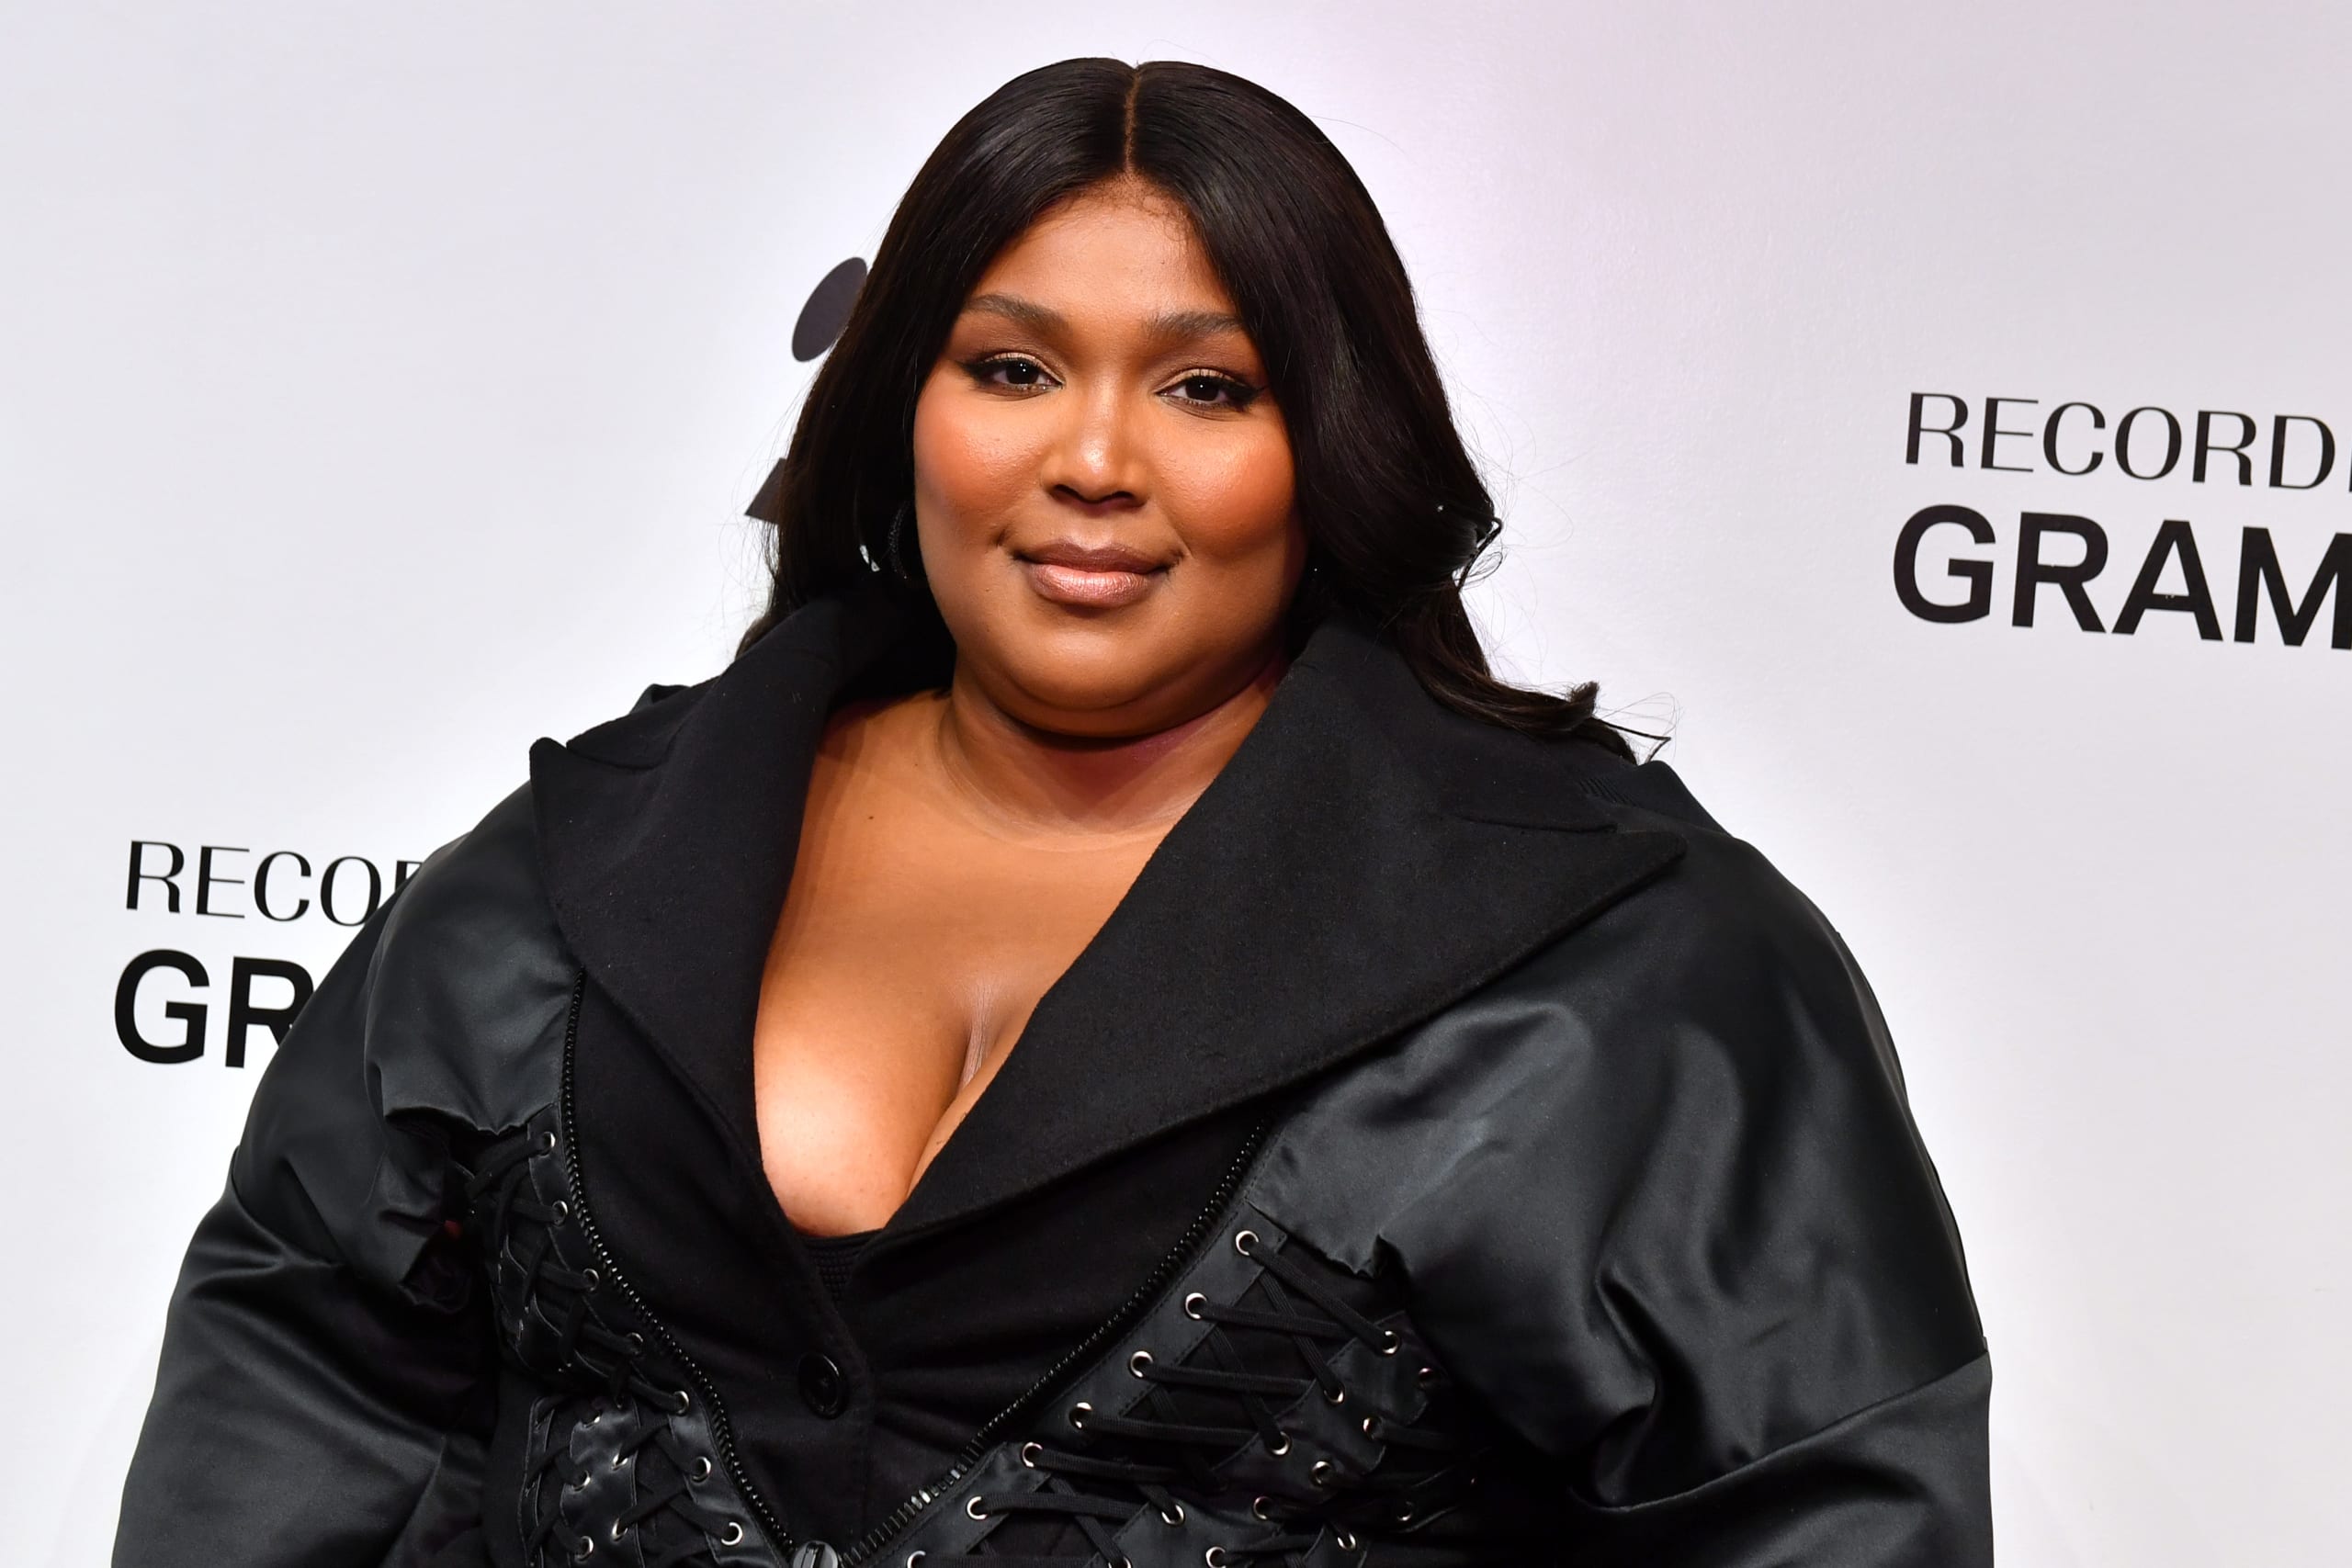 Lizzo accused of sexual harassment by former dancers in lawsuit